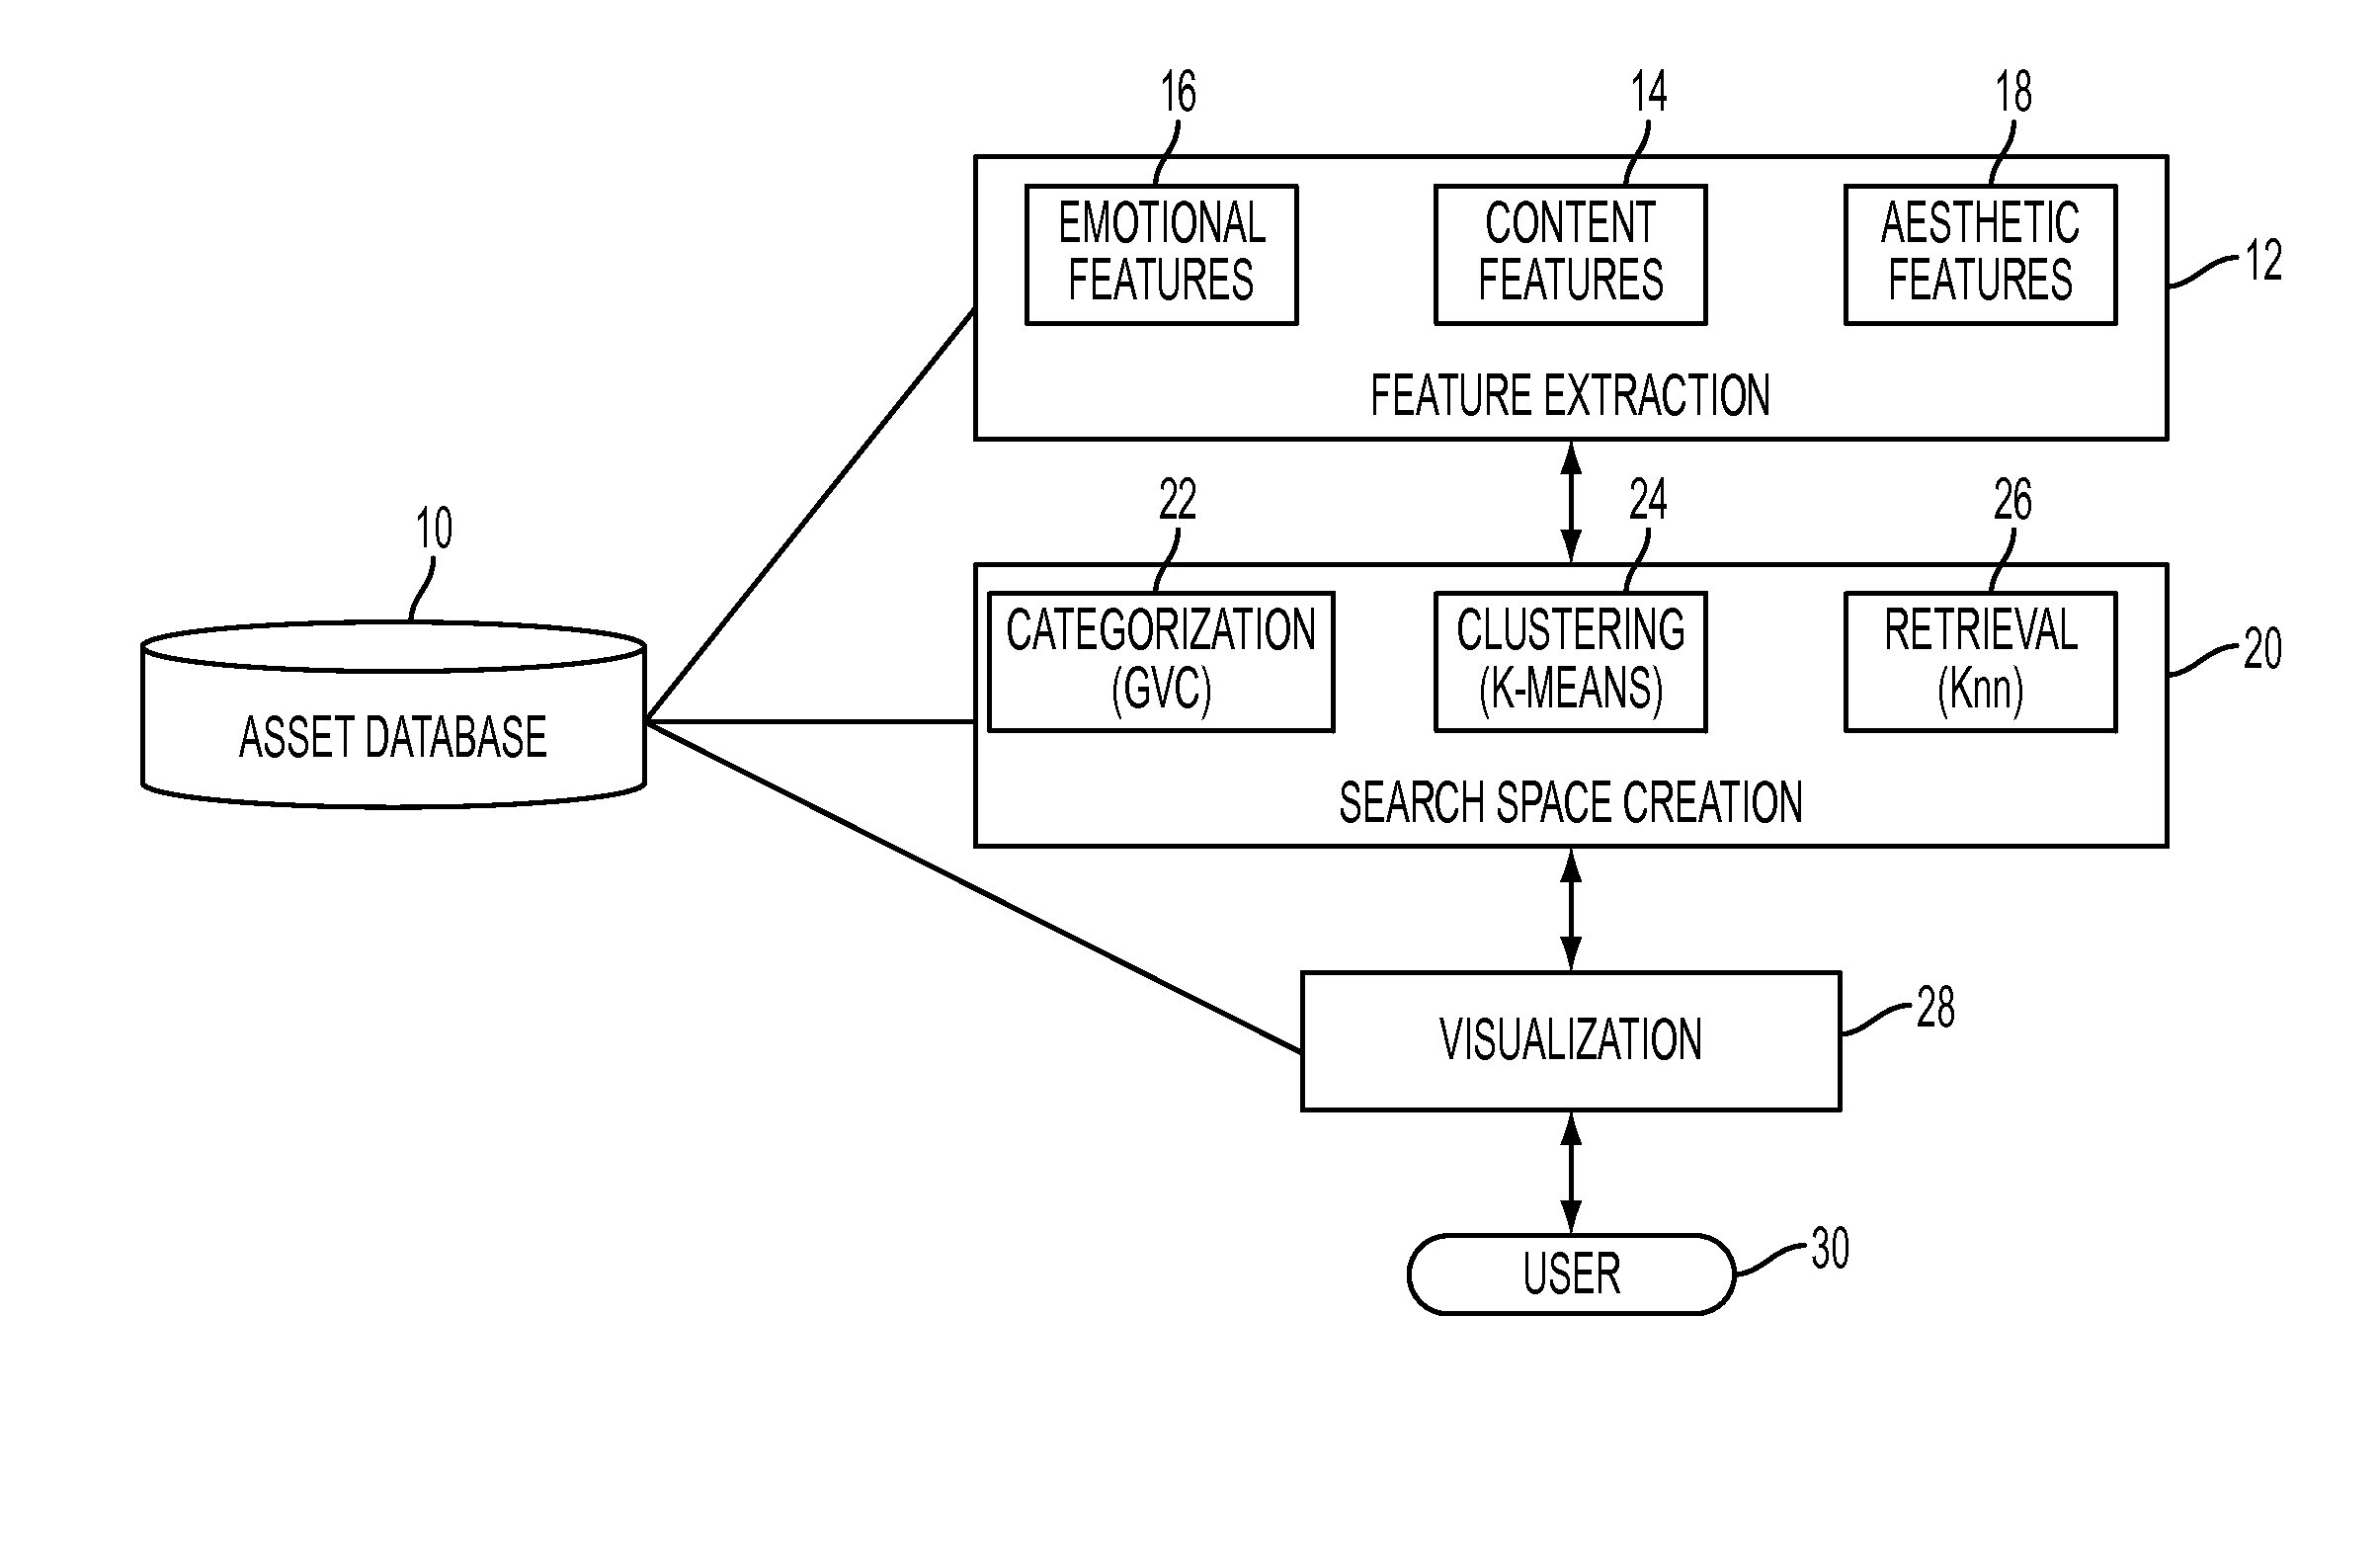 System for creative image navigation and exploration